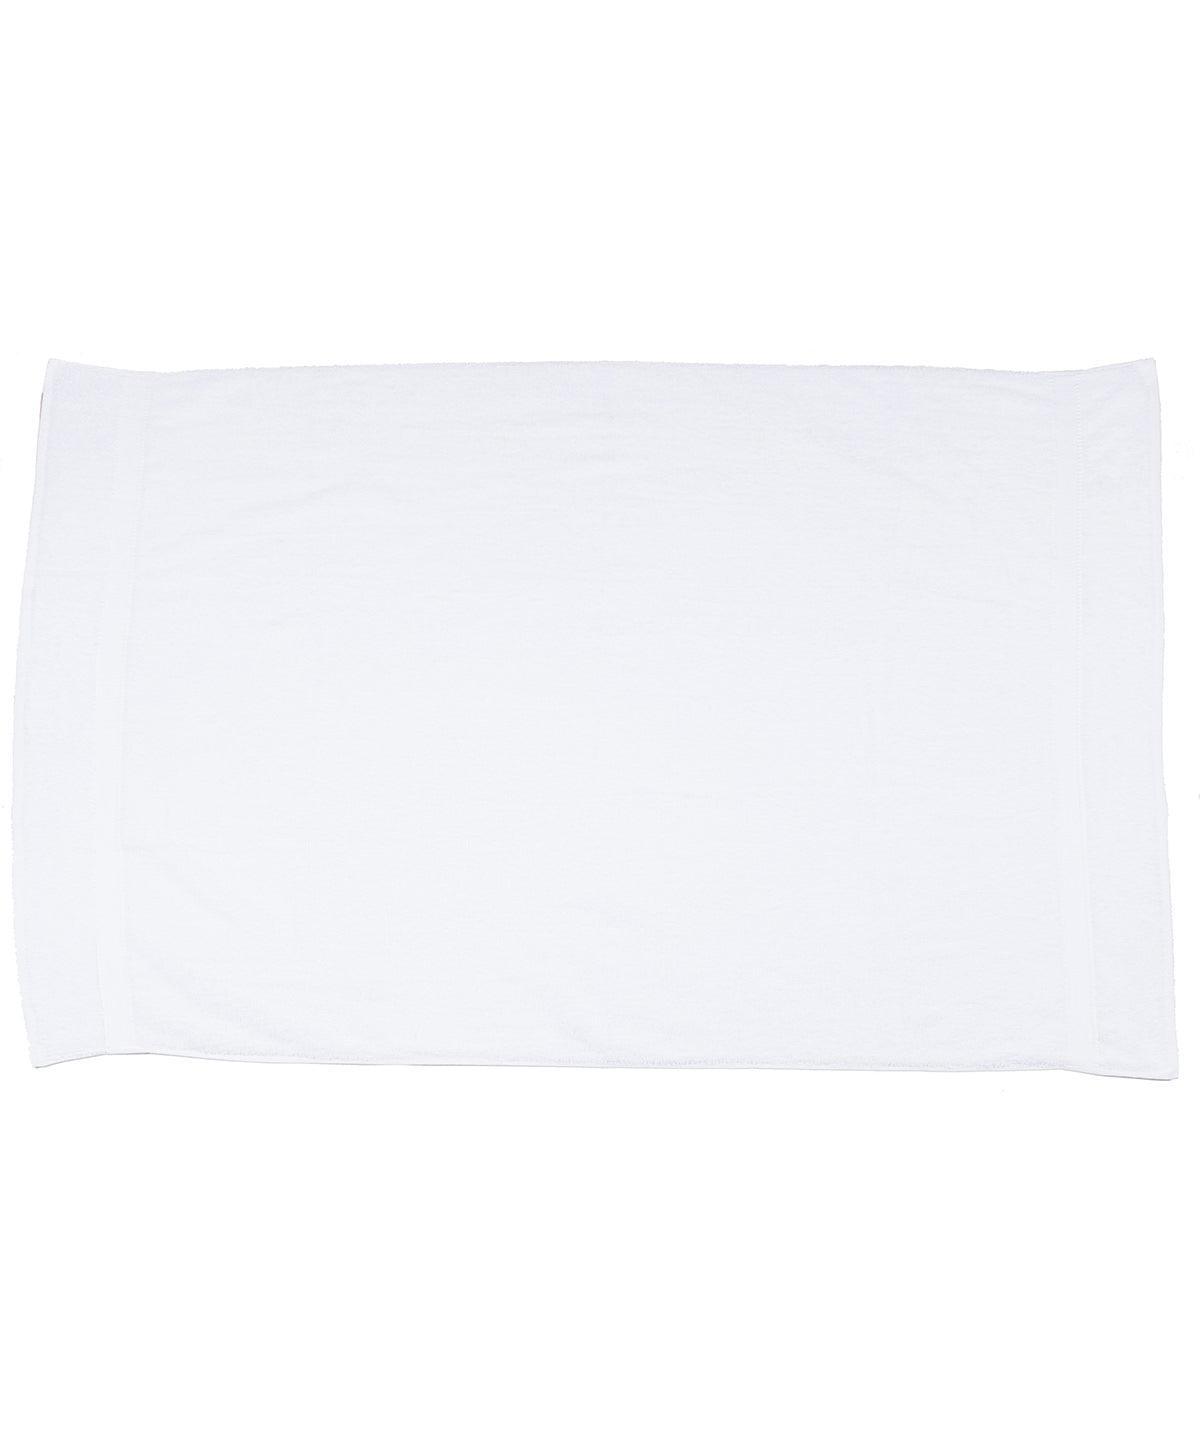 White - Luxury range bath sheet Towels Towel City Gifting & Accessories, Homewares & Towelling, Must Haves, Raladeal - Recently Added, S/S 19 Trend Colours Schoolwear Centres